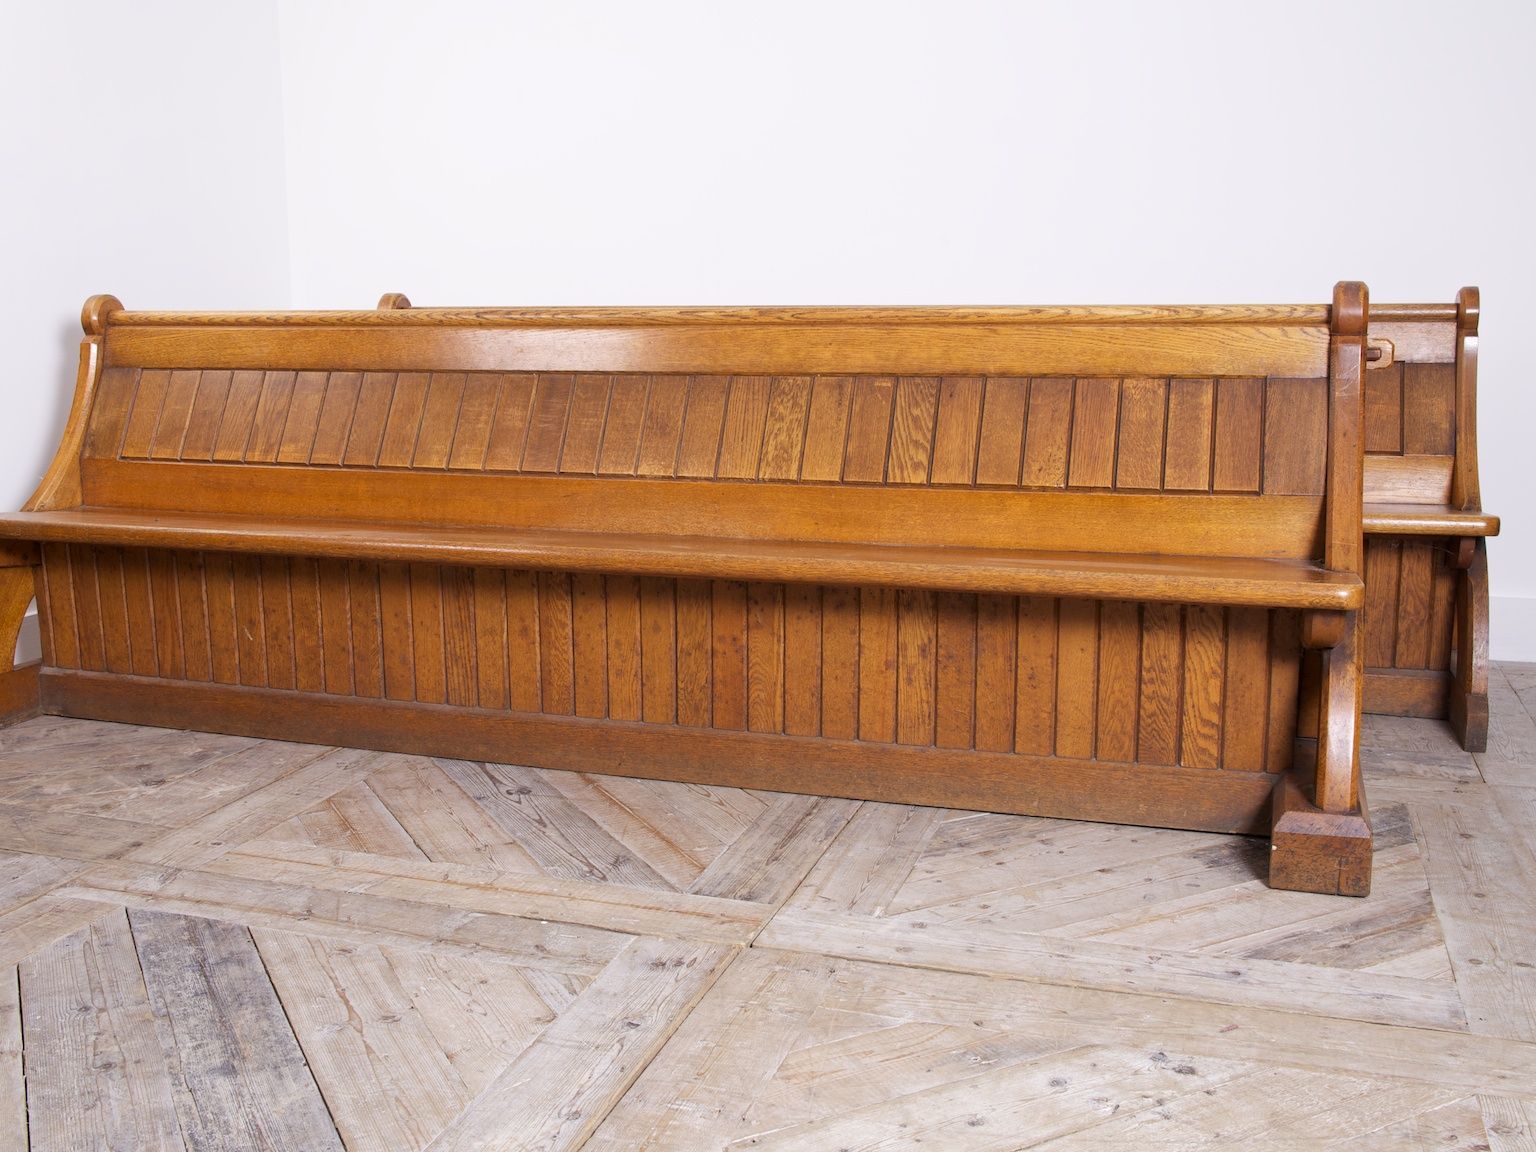 What are some tips for buying used church pews?